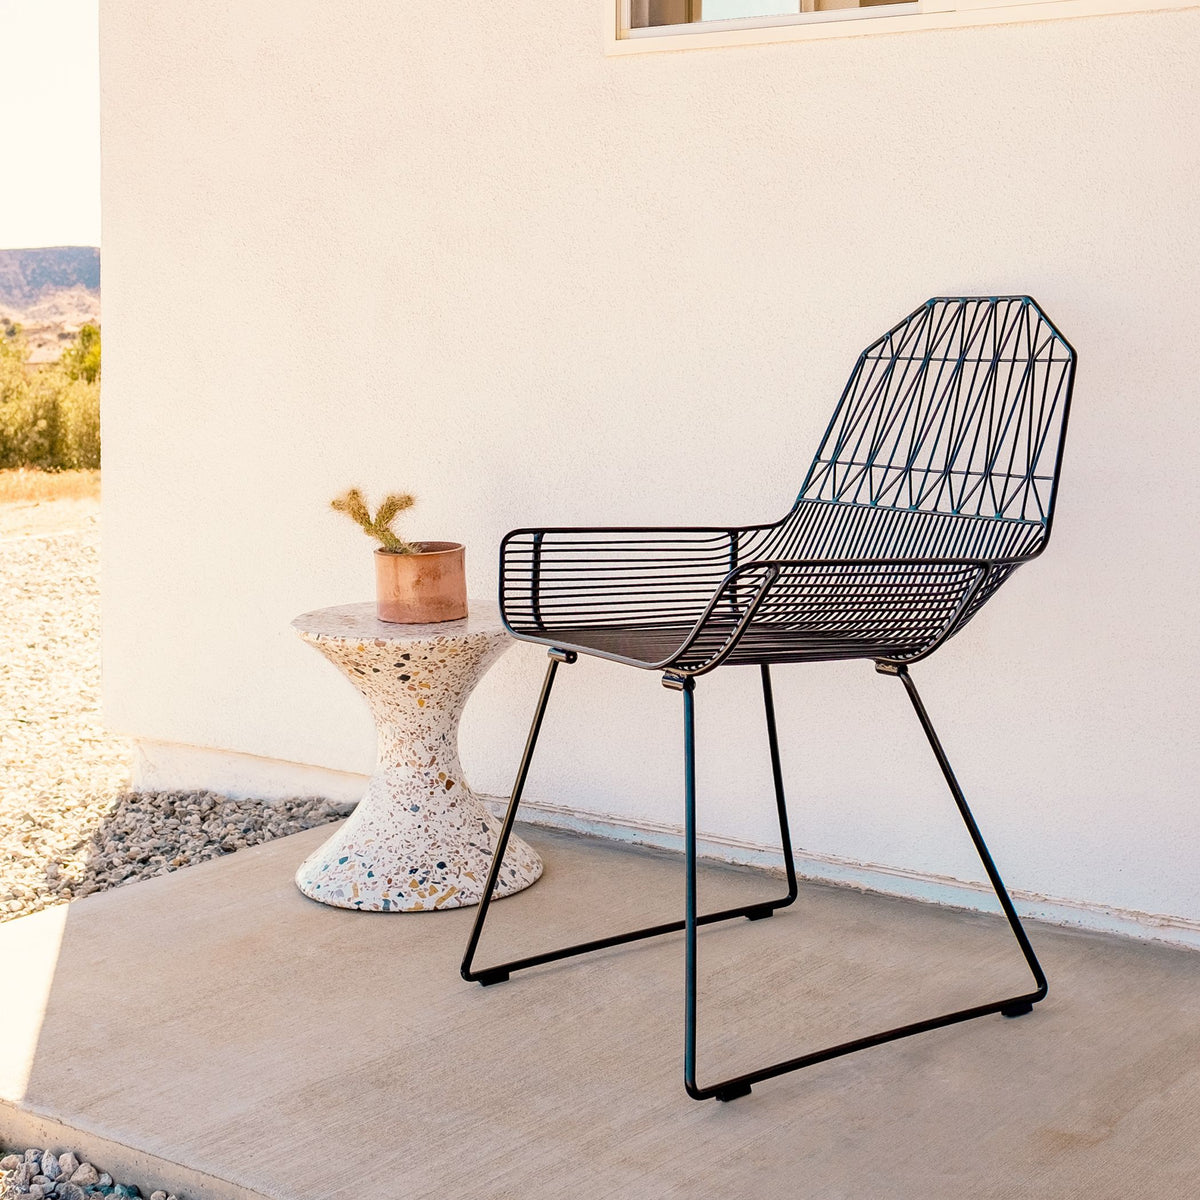 Farmhouse Lounge by Bend Goods (Made in the USA)